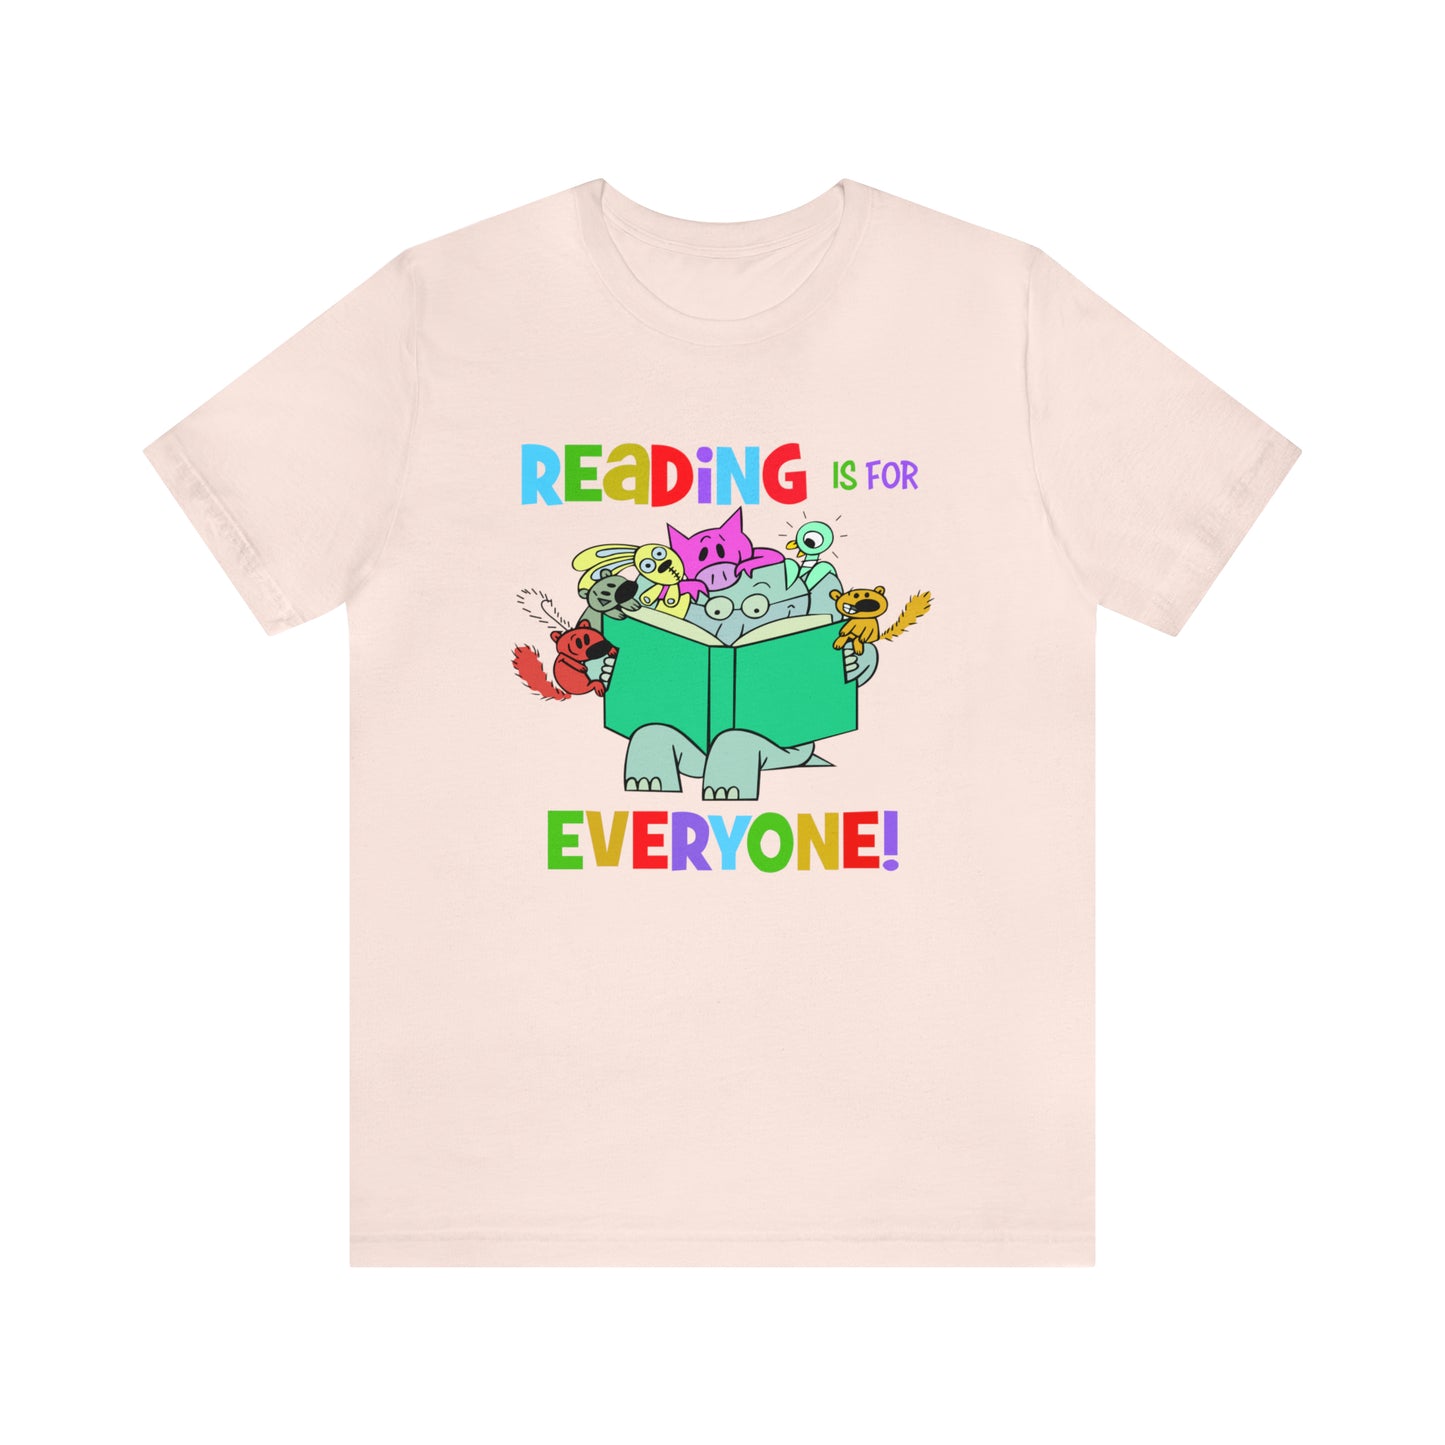 Reading is for everyone" Unisex Jersey Short Sleeve Tee